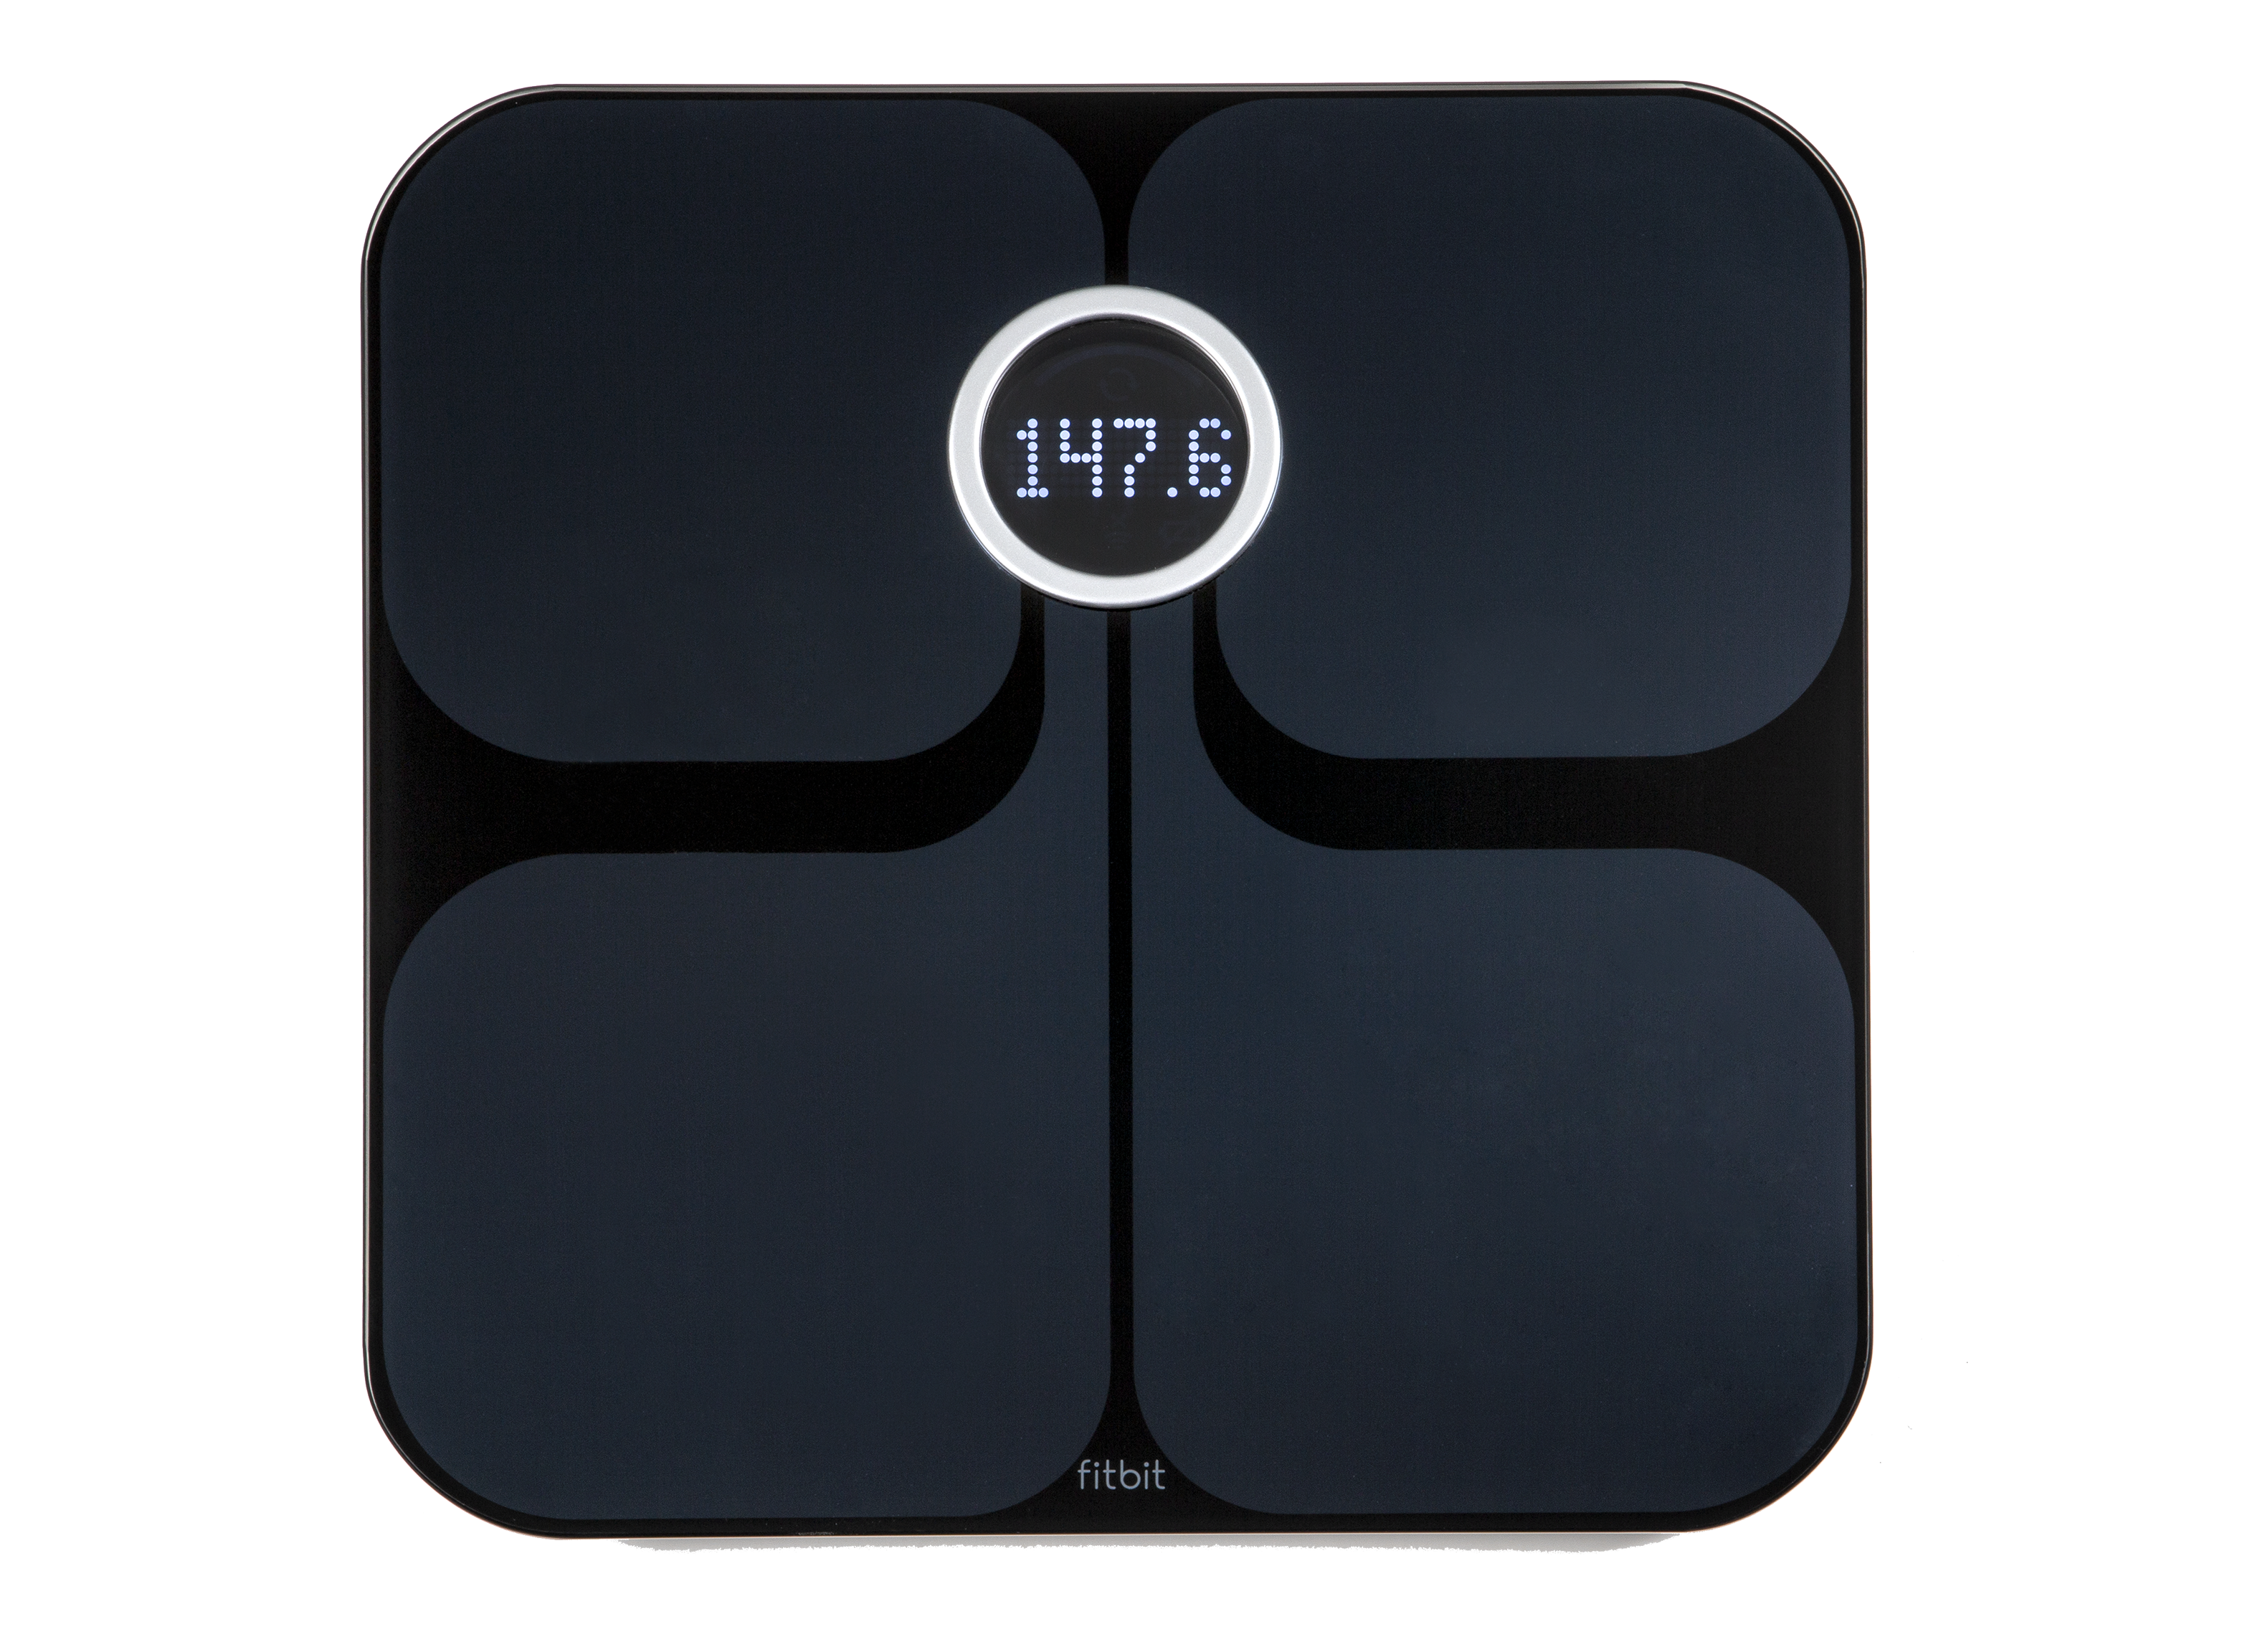 https://crdms.images.consumerreports.org/prod/products/cr/models/384608-bathroomscales-fitbit-ariawifismartscale.png